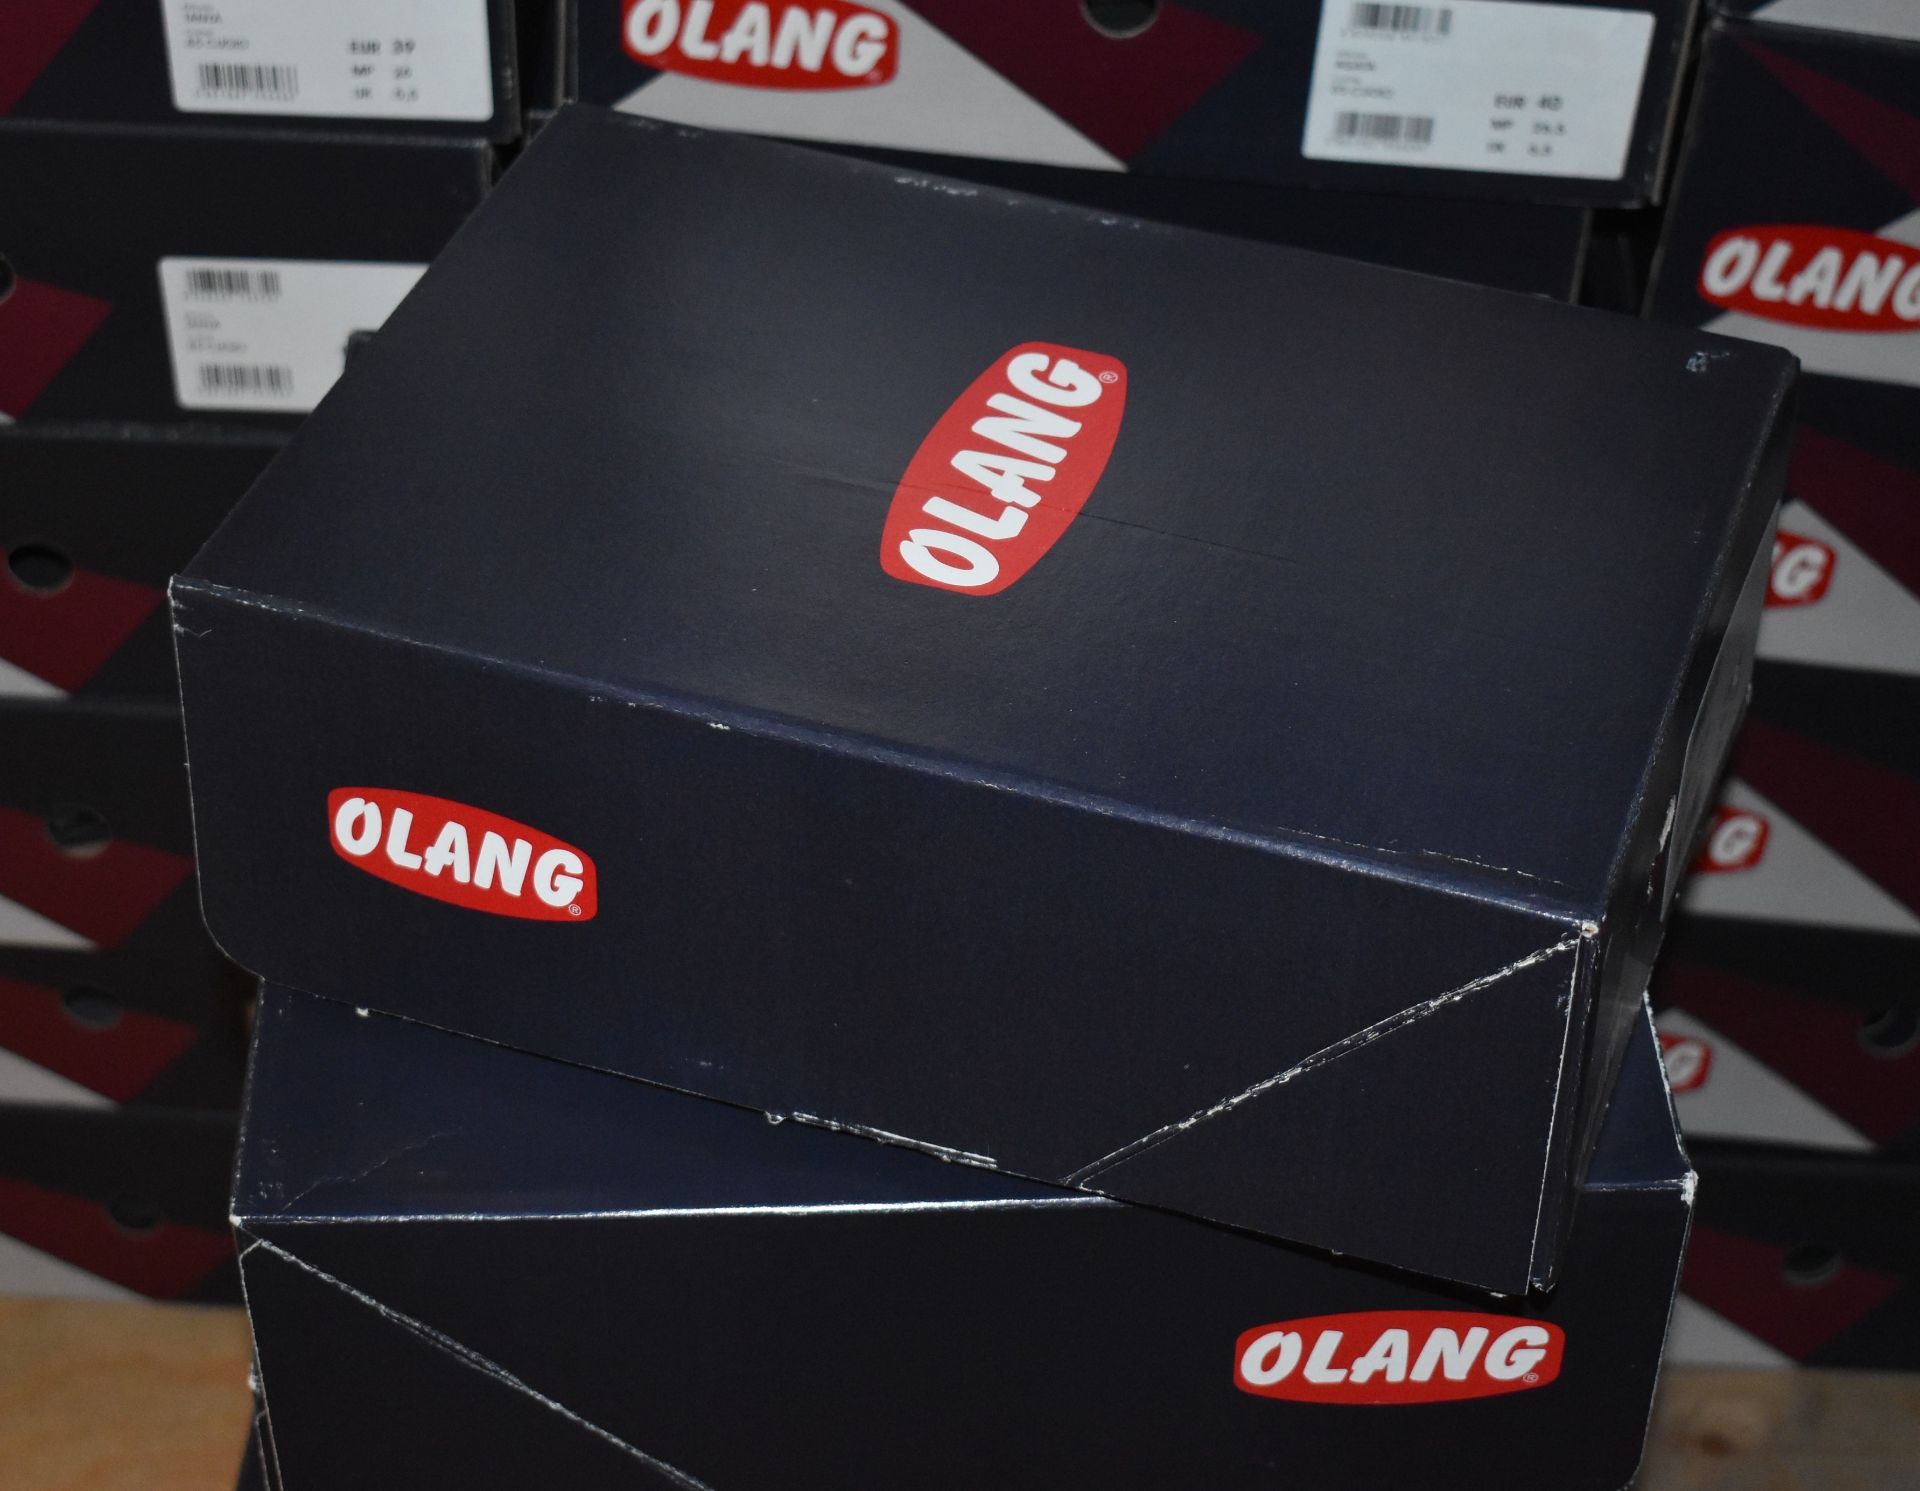 1 x Pair of Designer Olang Merano 82 Blu Women's Winter Boots - Euro Size 38 - Brand New Boxed Stock - Image 2 of 4